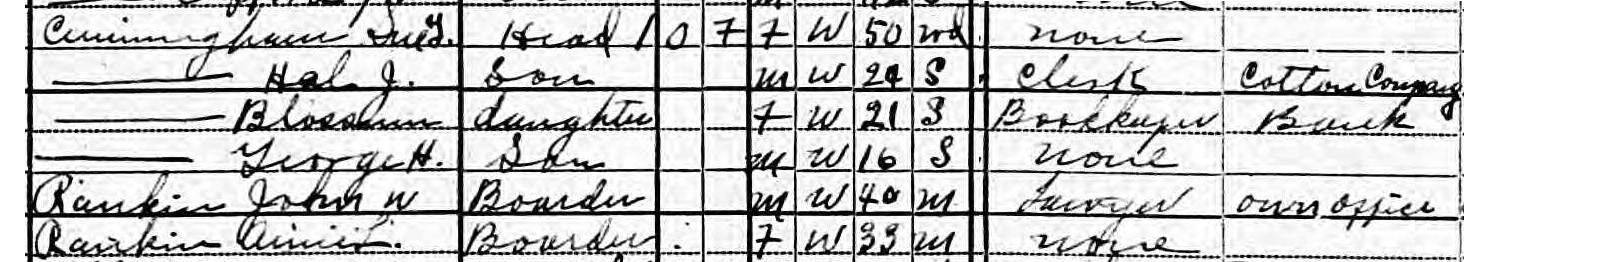 Census Record from 1940 that includes John E Rankin